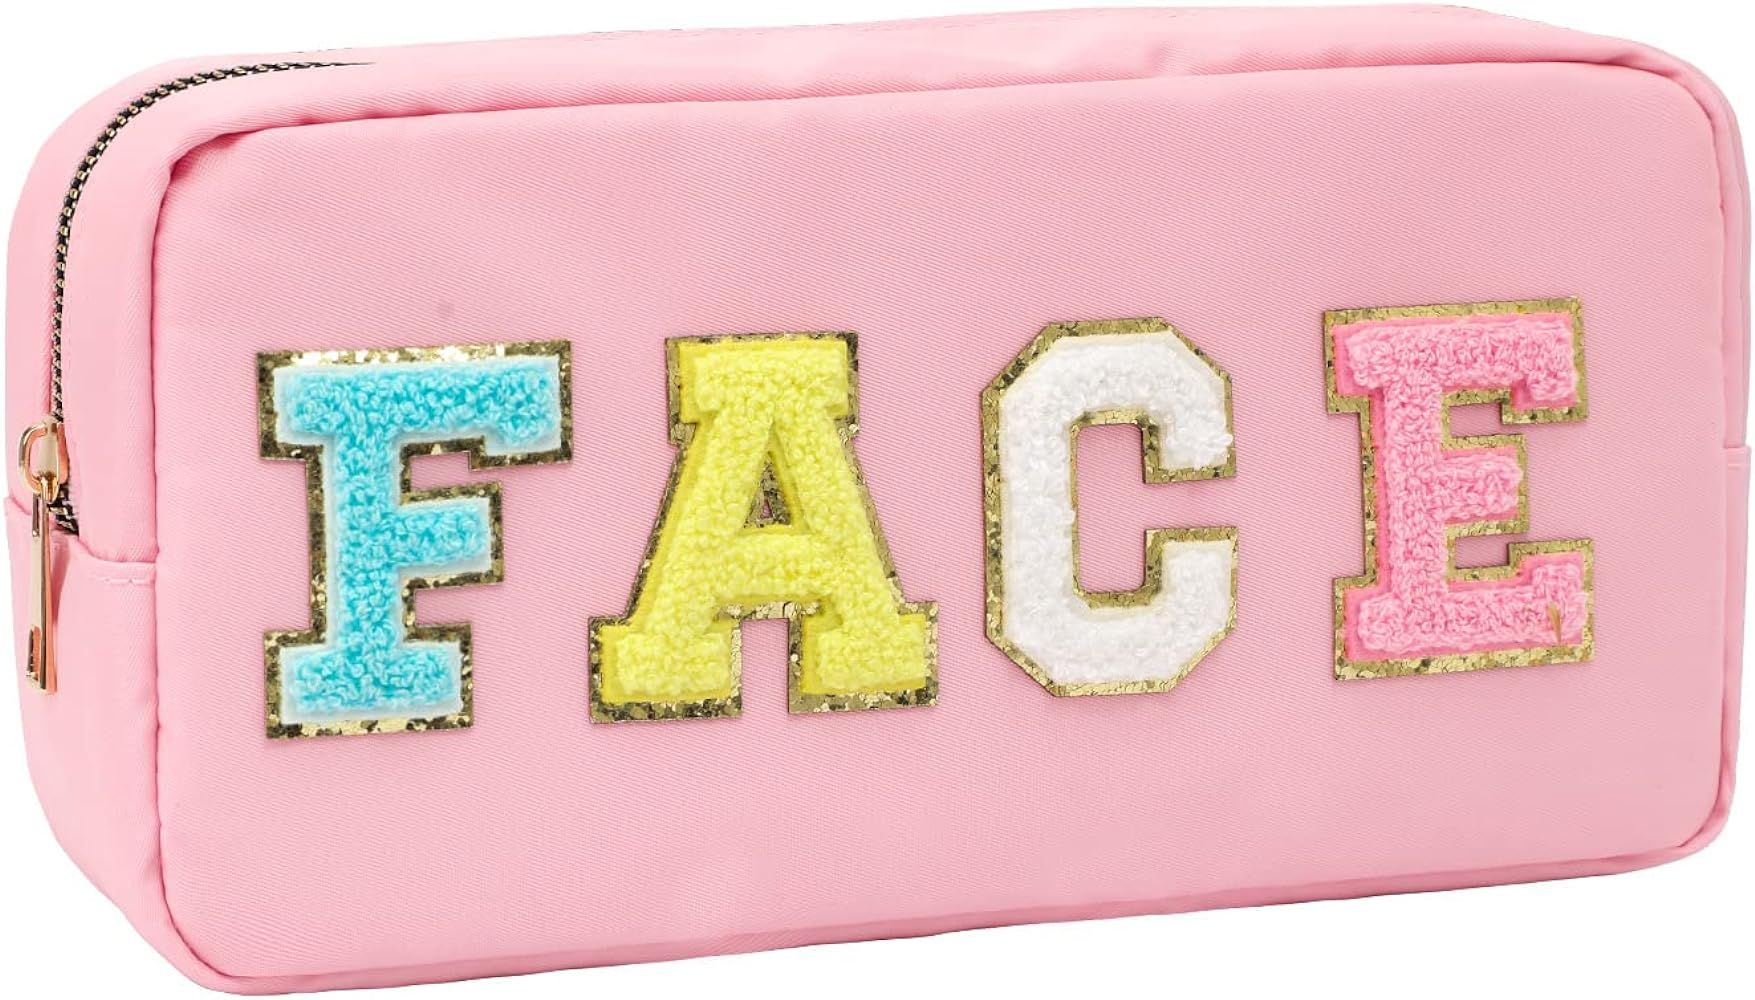 DYSHAYEN Nylon Cosmetic Bag Small Travel Makeup Pouch Bag for Women Girls with Chenille Letter Patch | Amazon (US)